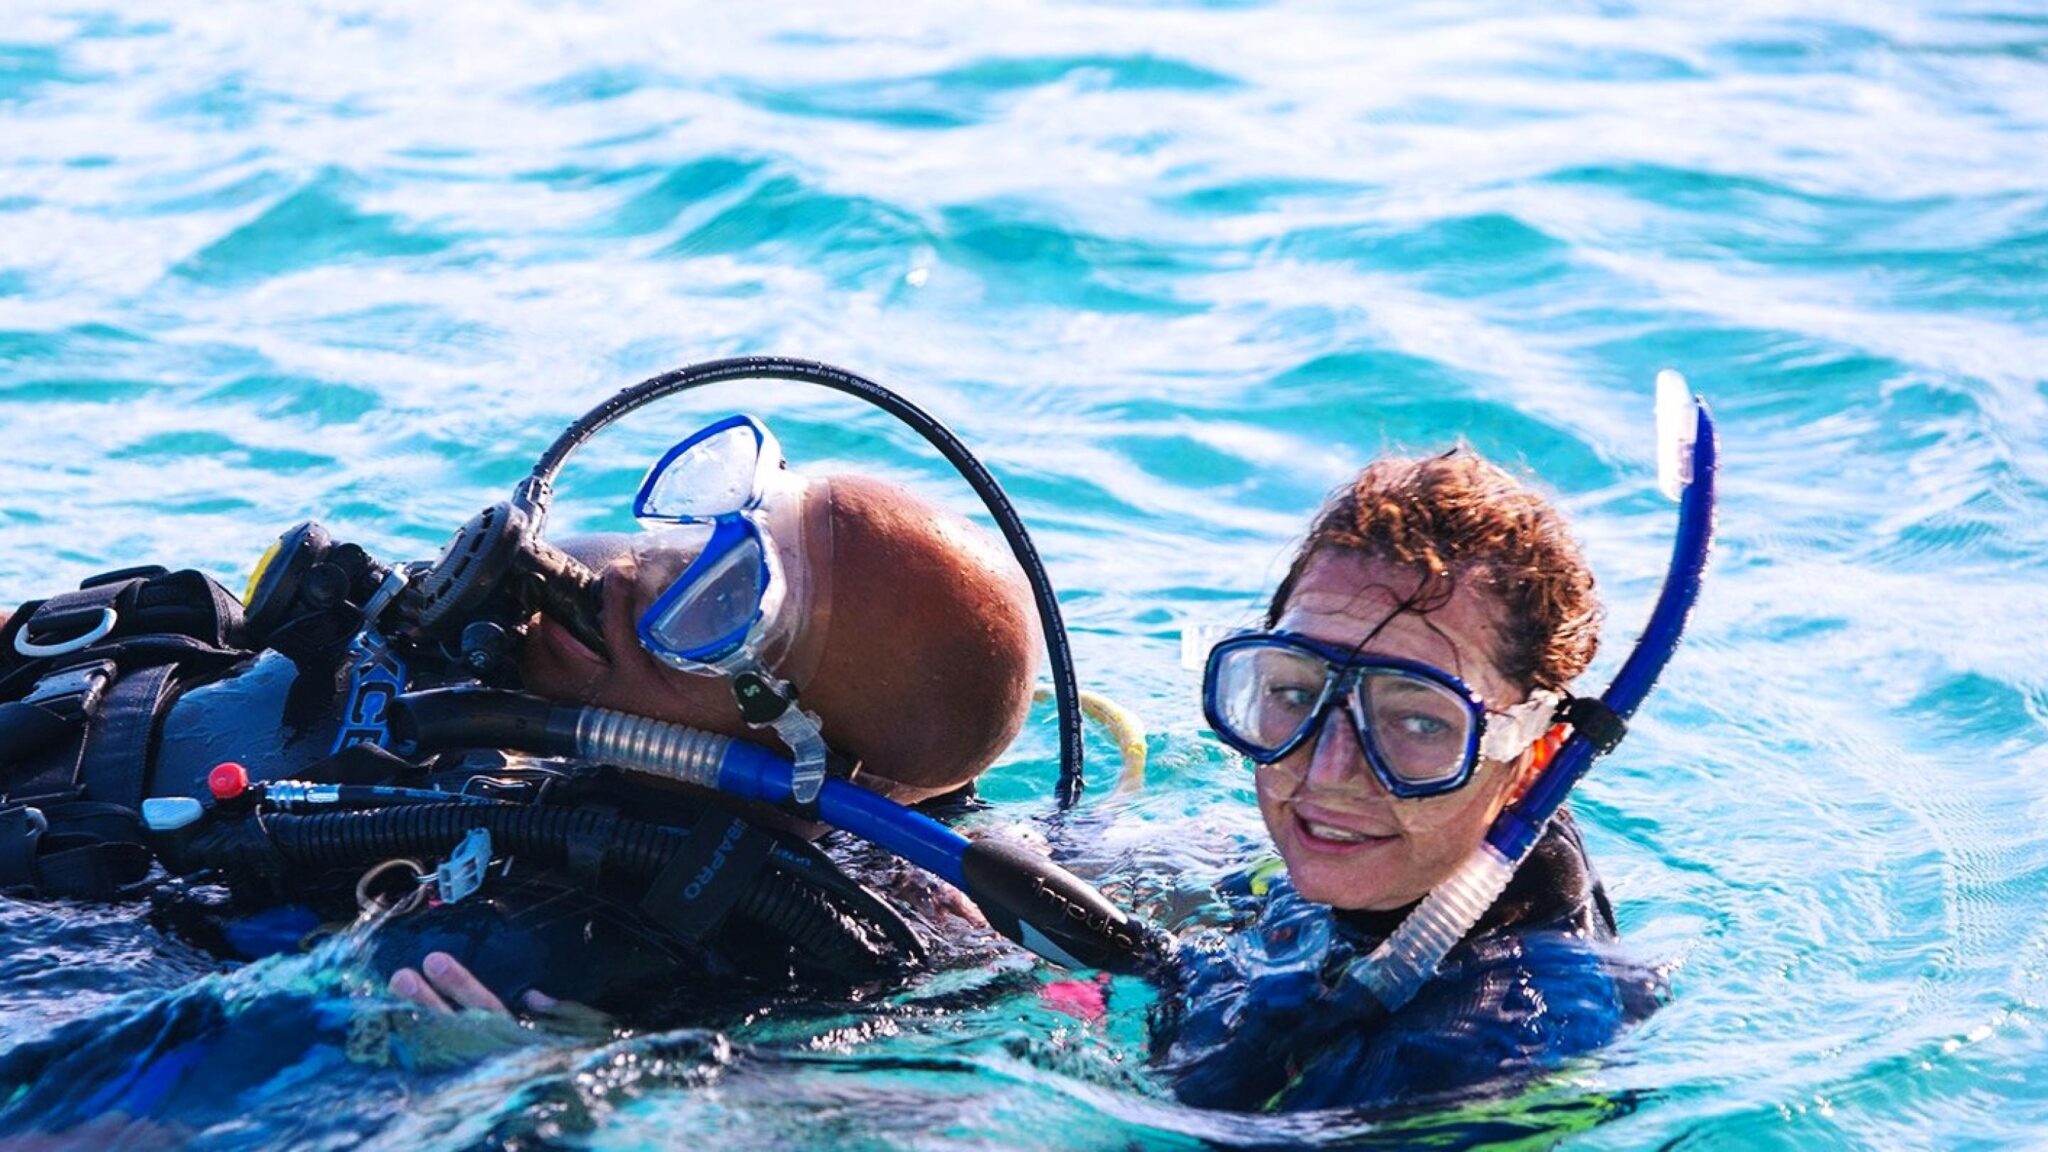 A small female diver rescues a larger male diver during the Rescue Diver course